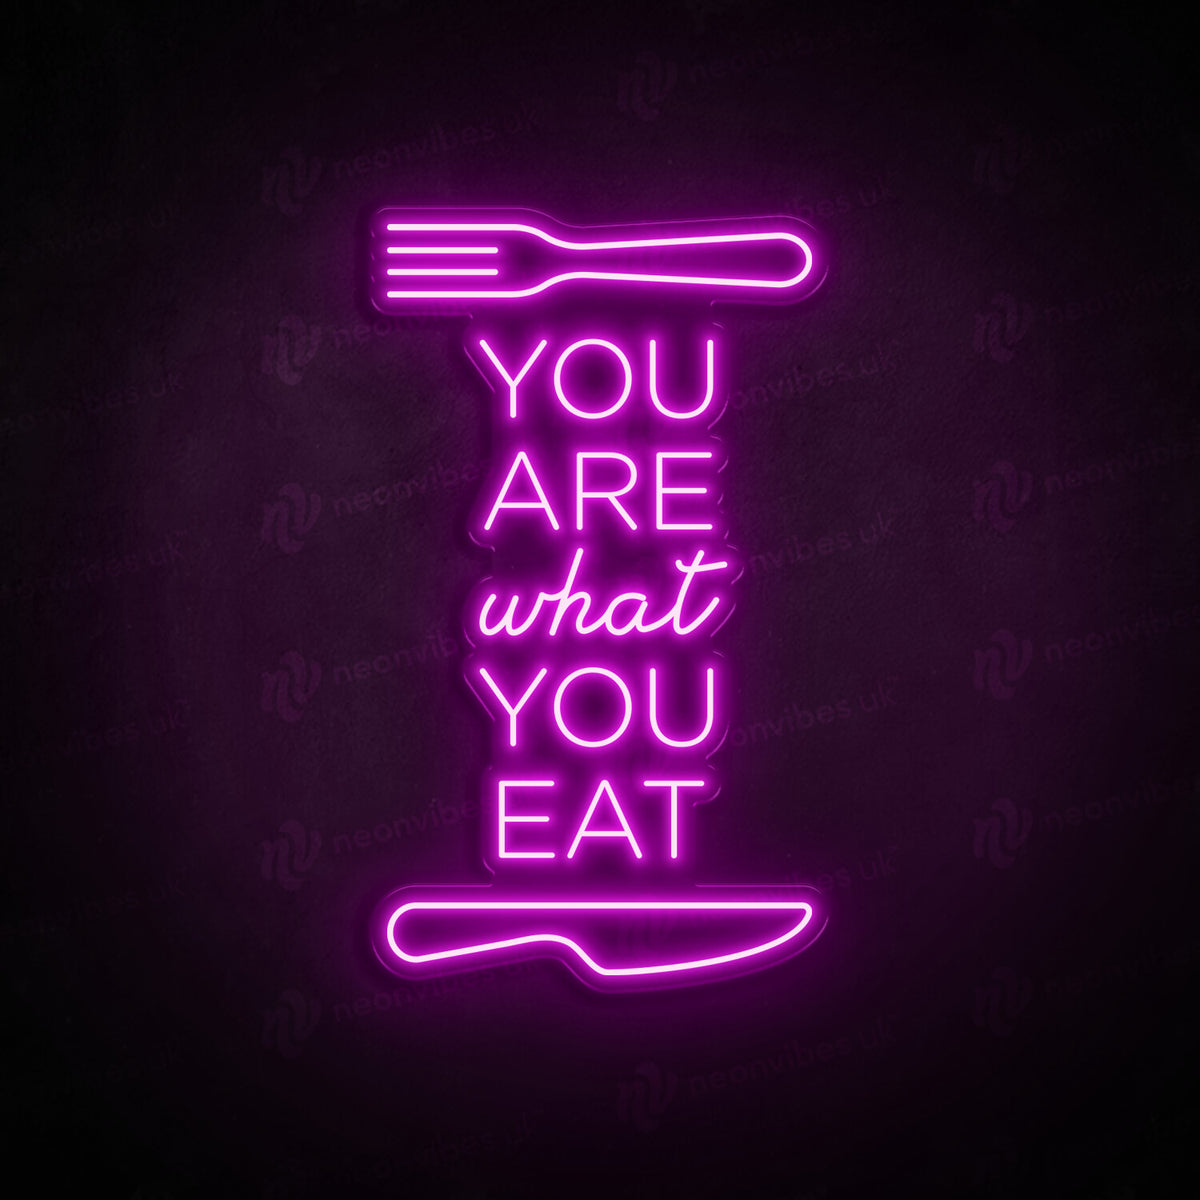 You are what you eat neon sign